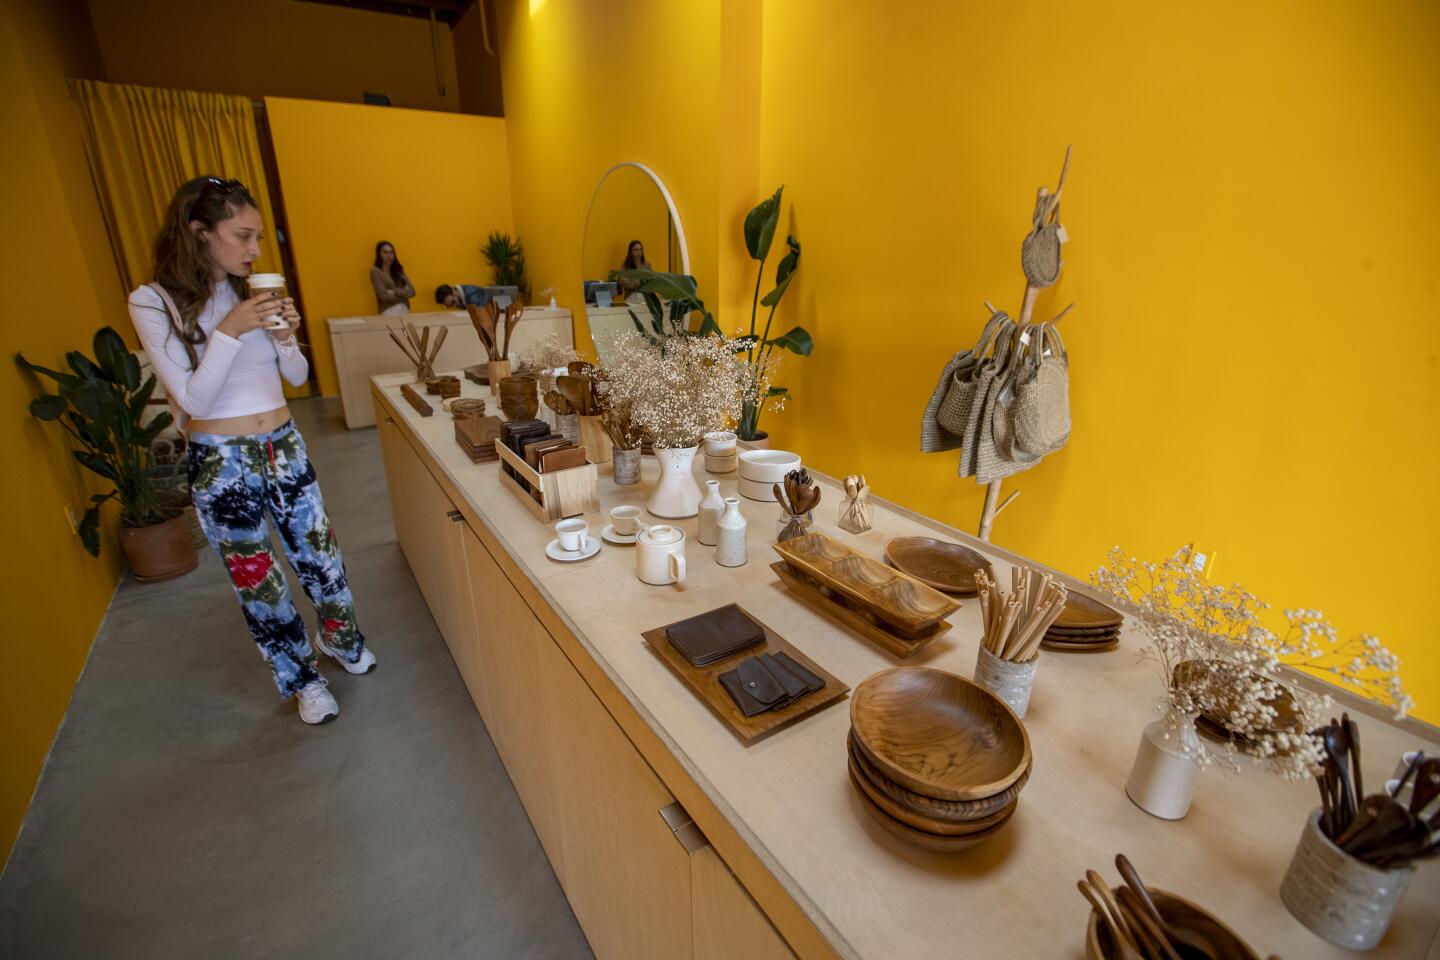 An interior view of Goodies, where the claim is “Nothing over $25." You'll find wooden bowls, ceramics, spoons and baskets on display.